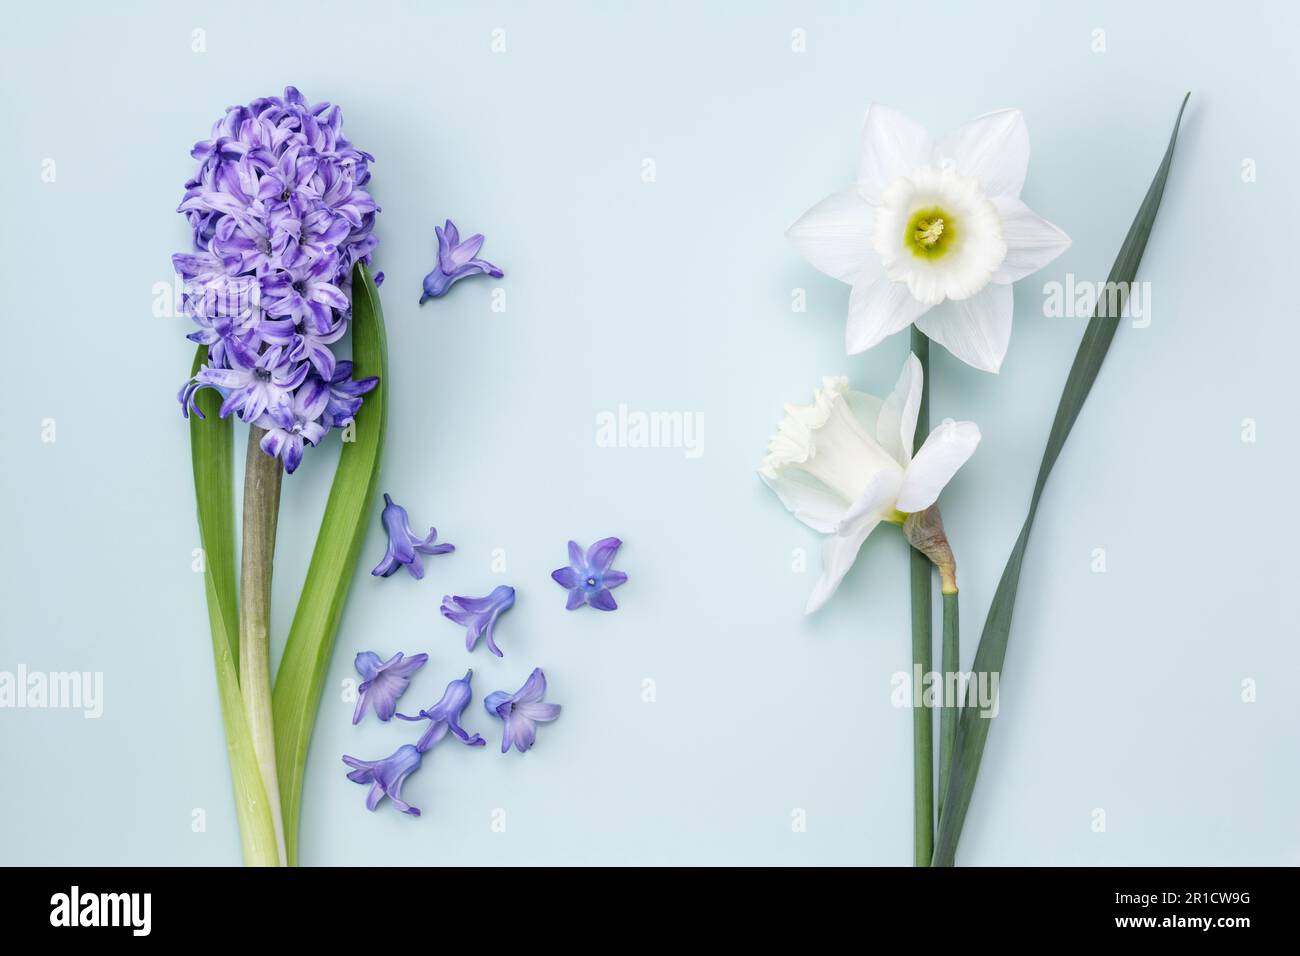 Hyacinth and daffodils on light blue background Stock Photo